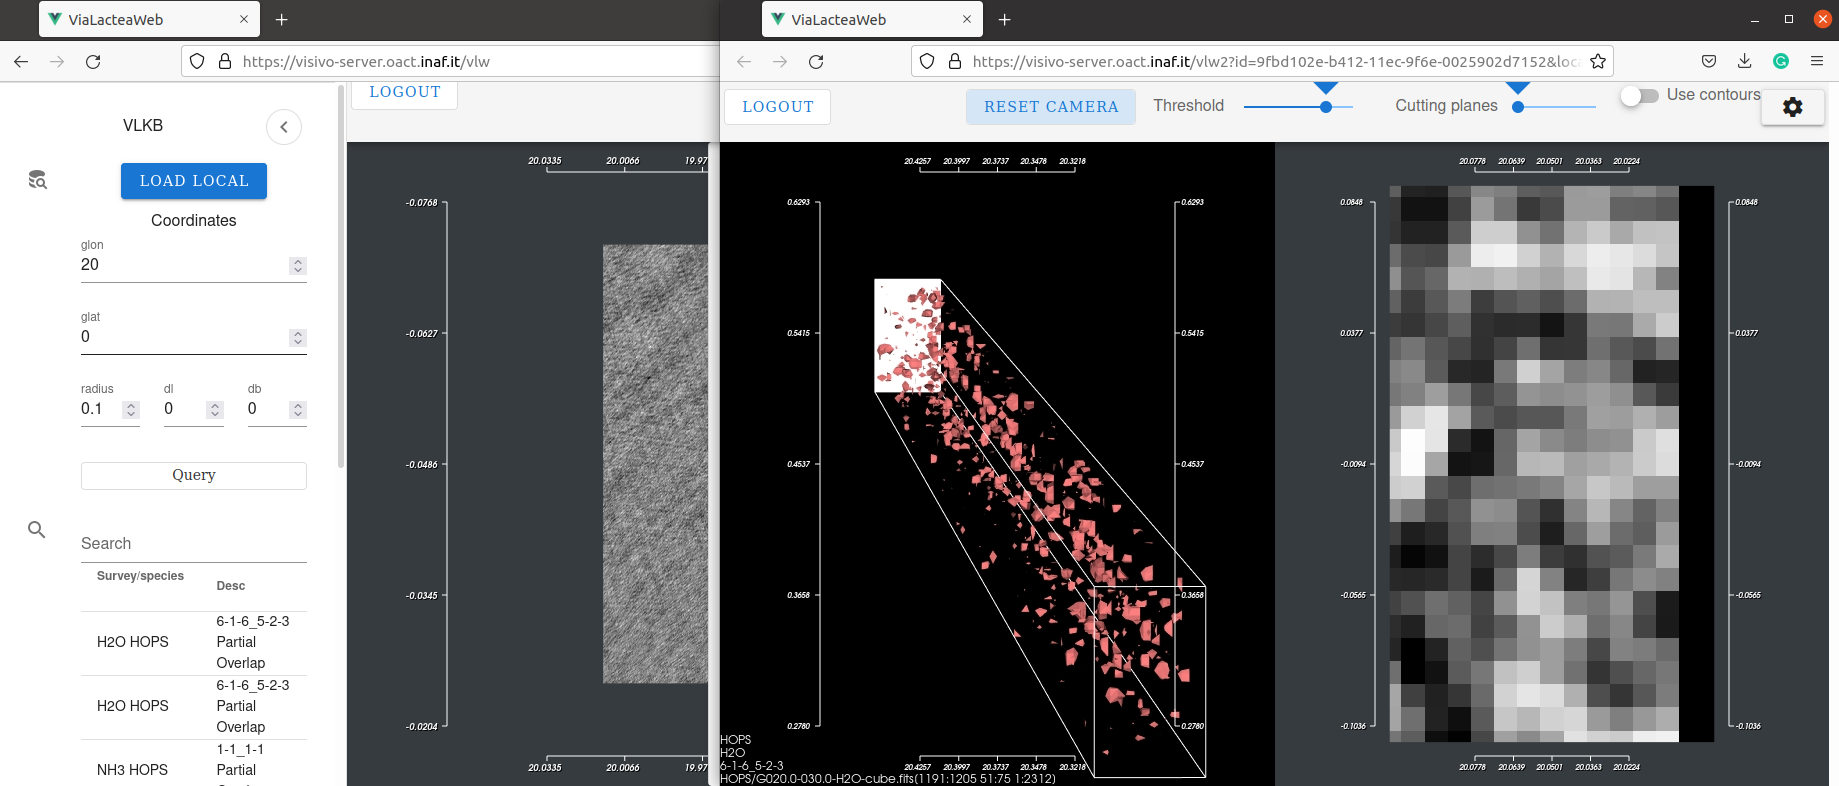 The selected 2D image and DataCube survey available in different tabs